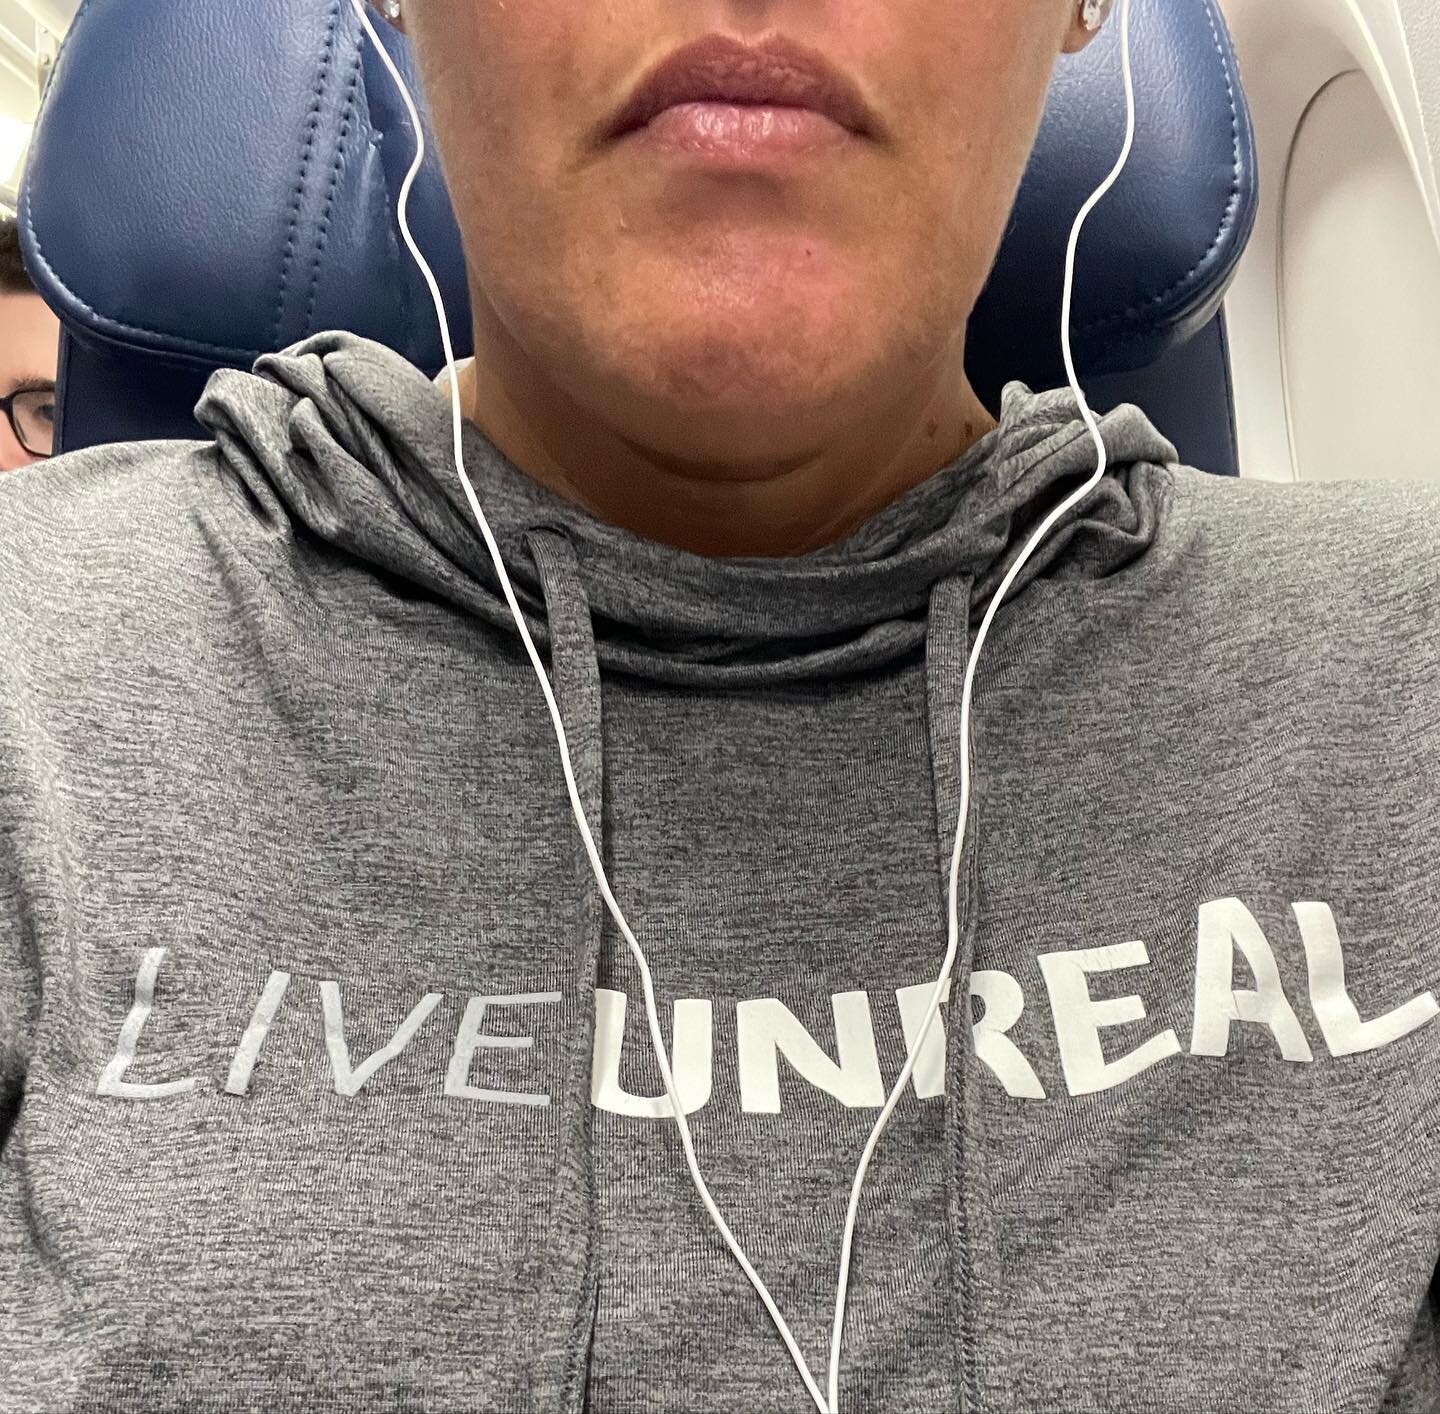 Thank you Delta for the inflight entertainment. Headed to Travers City for an #unreal experience over the next 4 days at the #gloveru retreat. Who will I see?